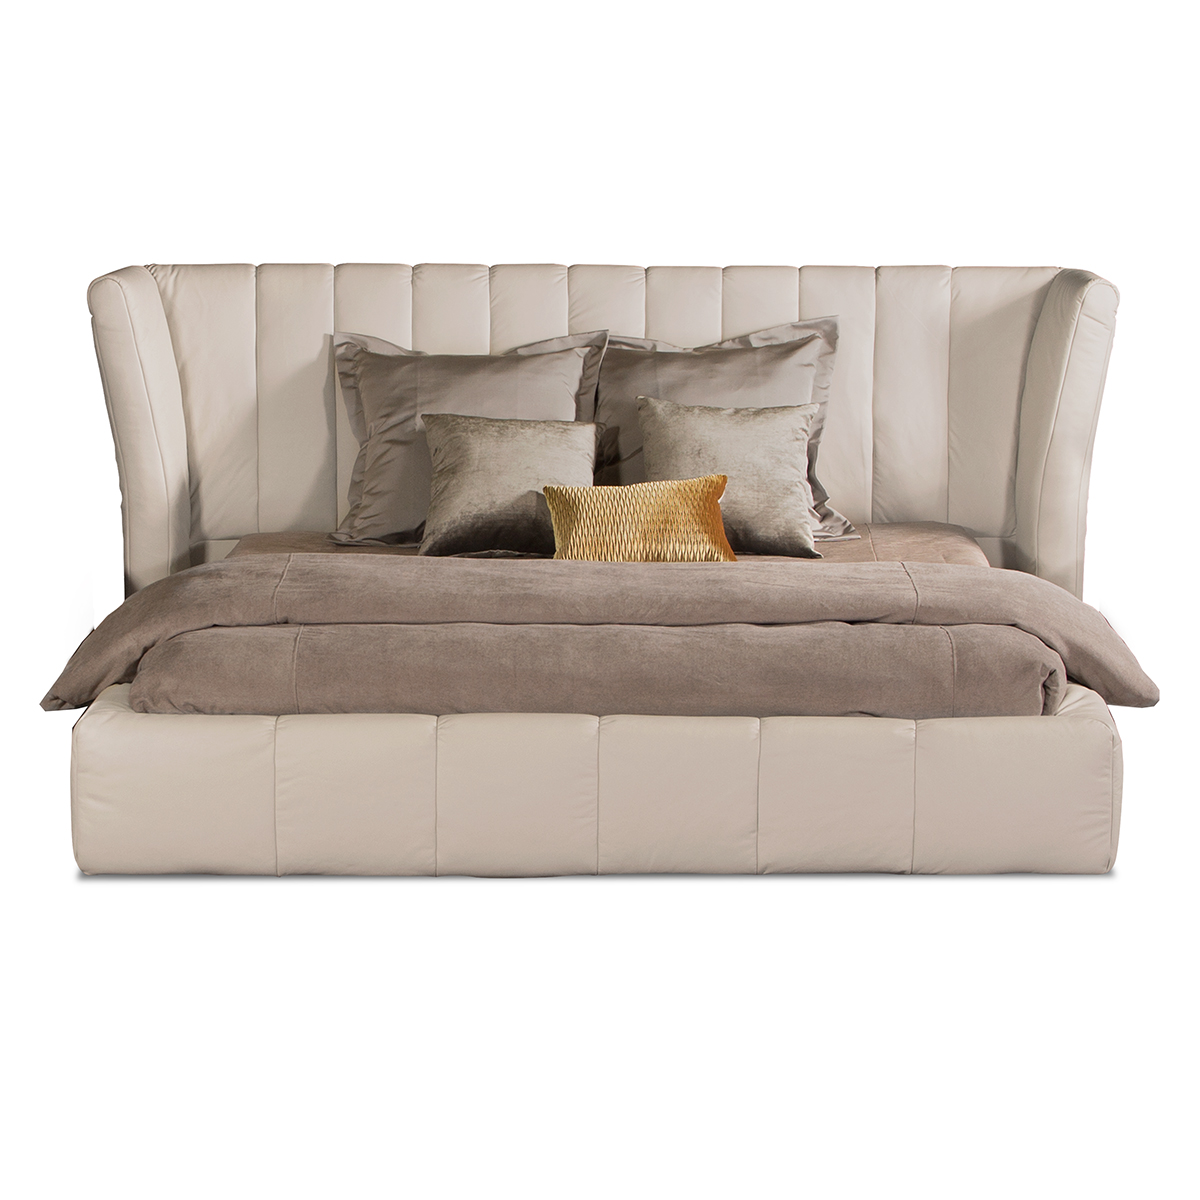 Manhattan King Leather Bed